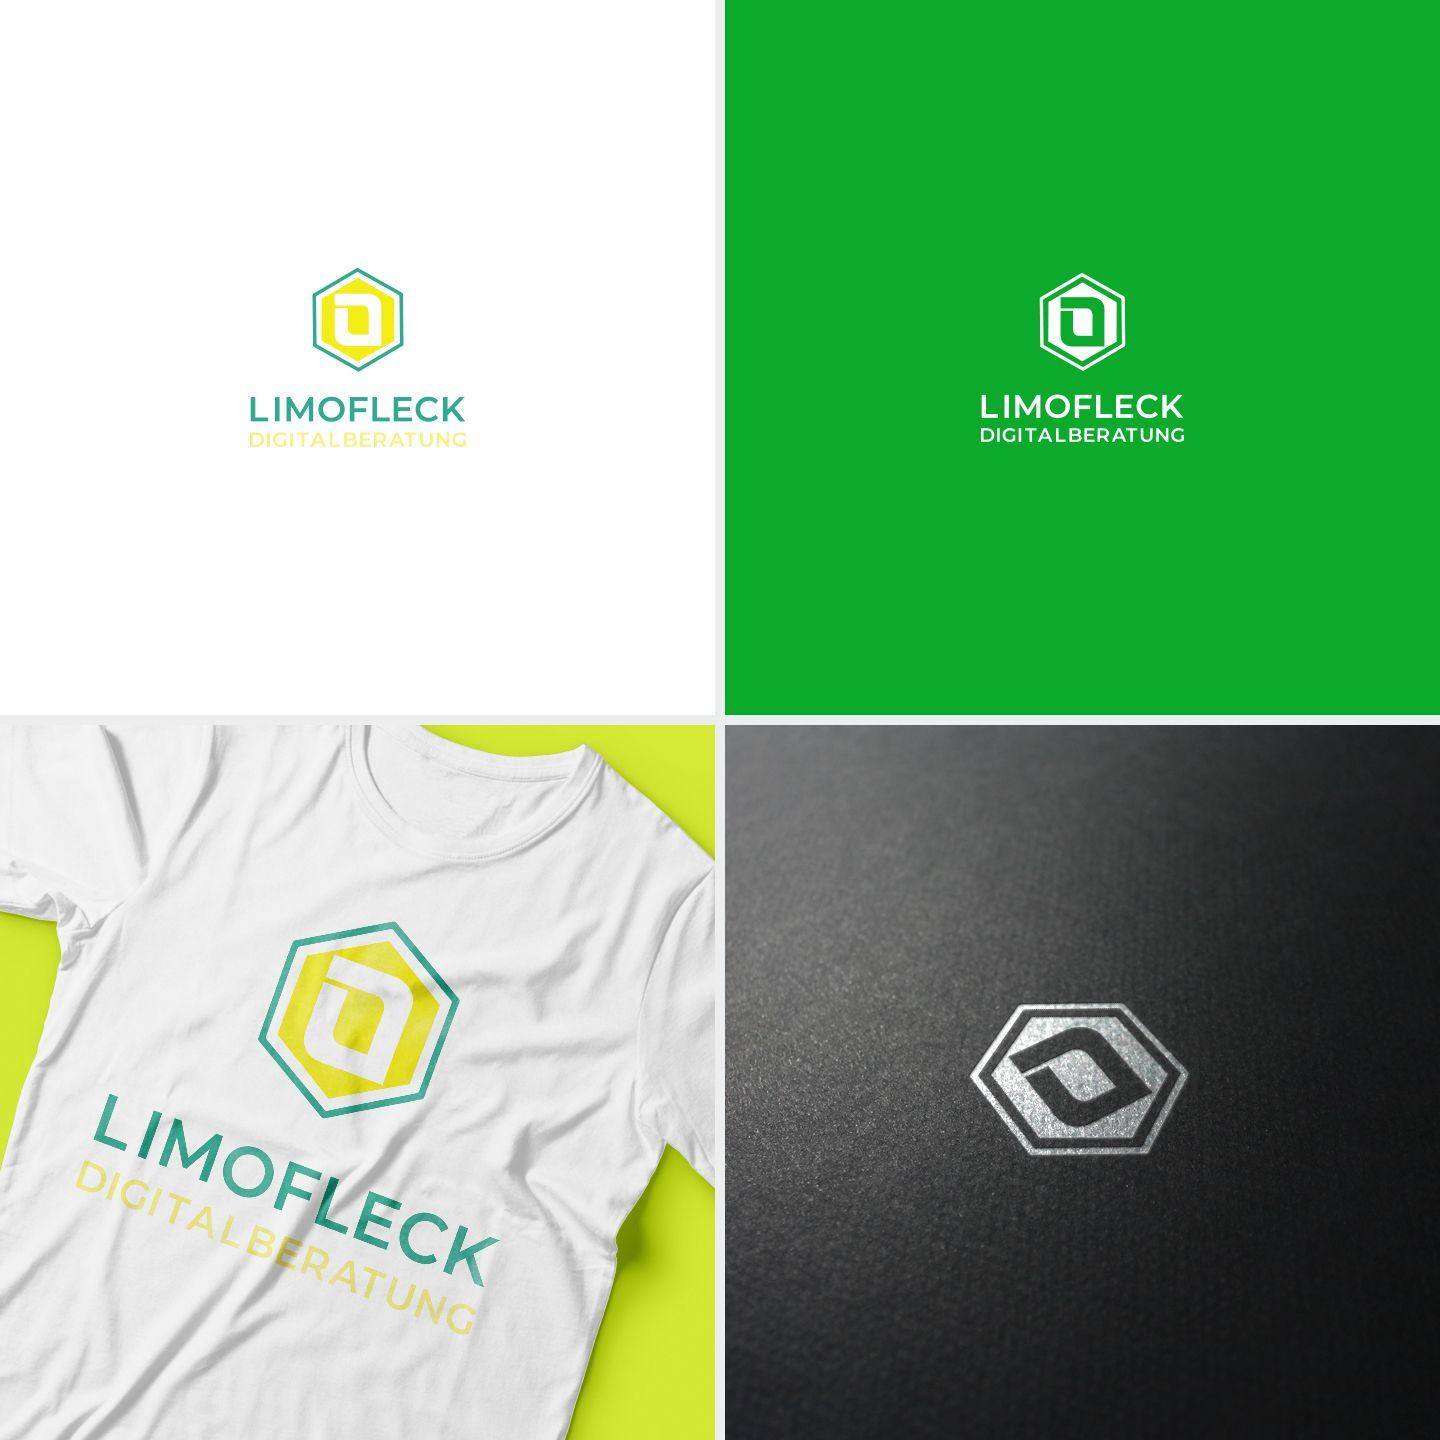 CH Logo - Modern, Professional, Business Consultant Logo Design for Limofleck ...